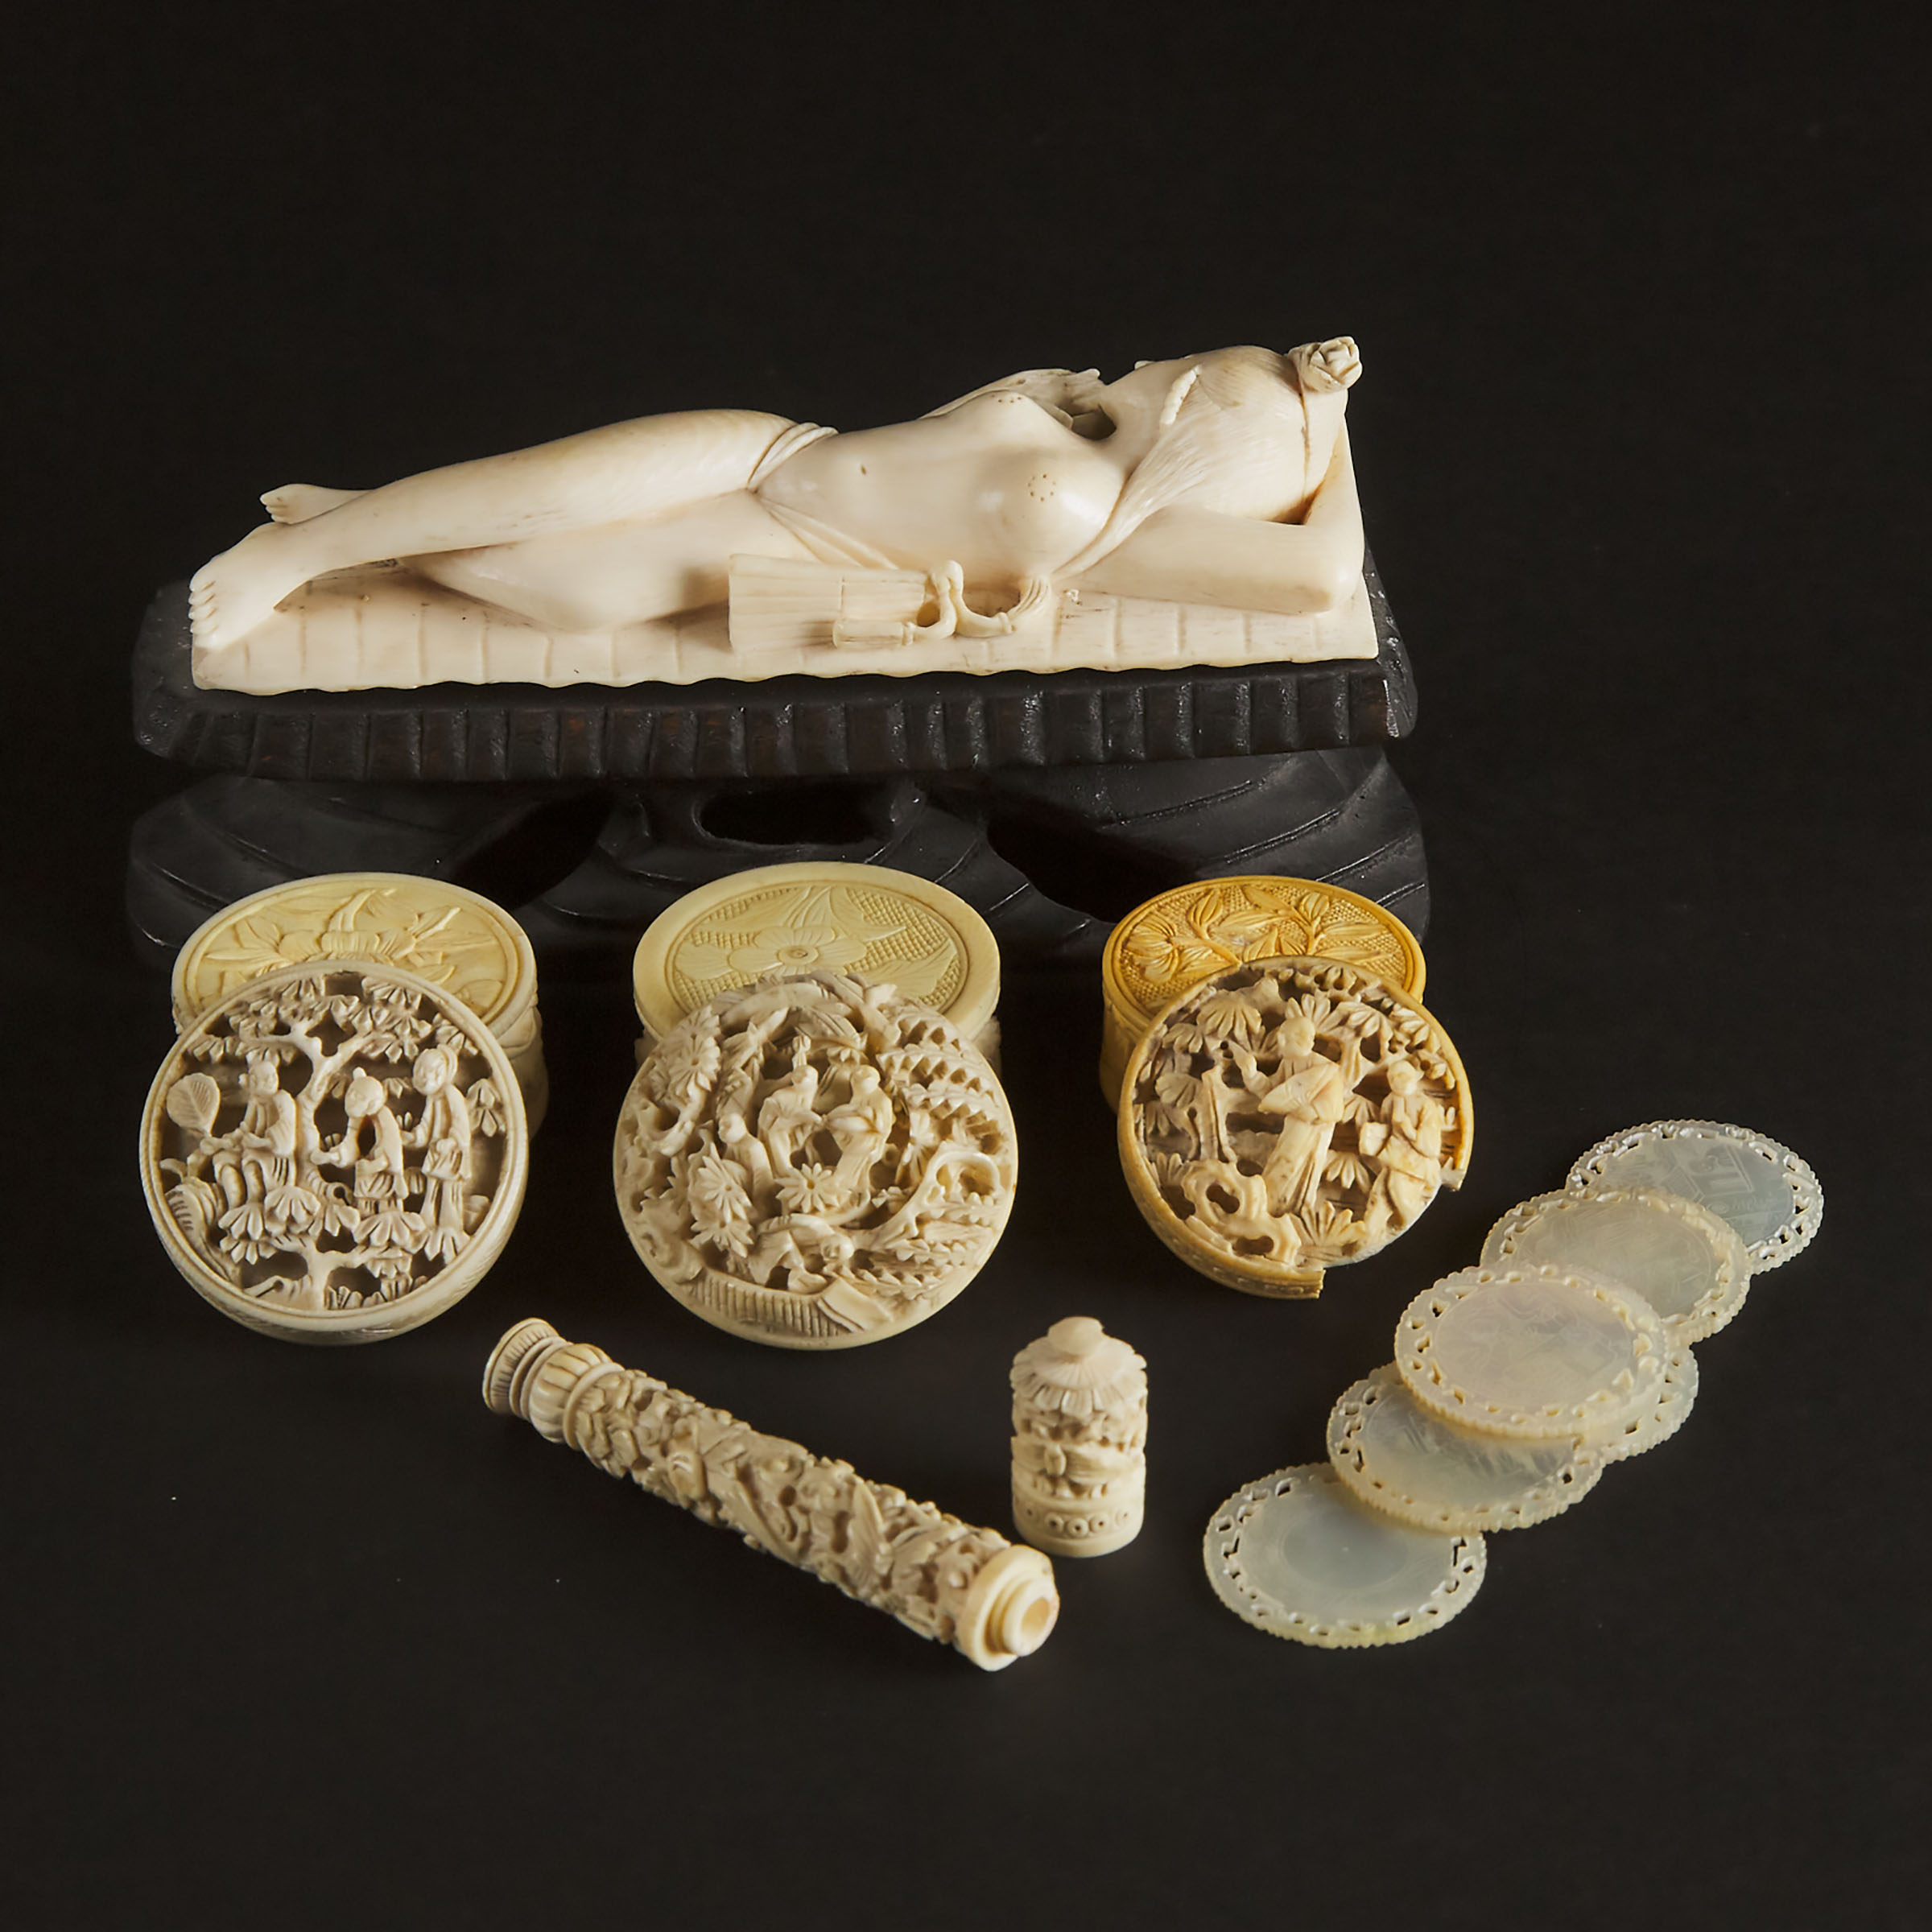 An Ivory 'Doctor's Doll' Figure, Together With Three Chinese Ivory Carved Circular Boxes, One Needle Case, and Six Mother-of-Pearl Game Counters, Circa 1900